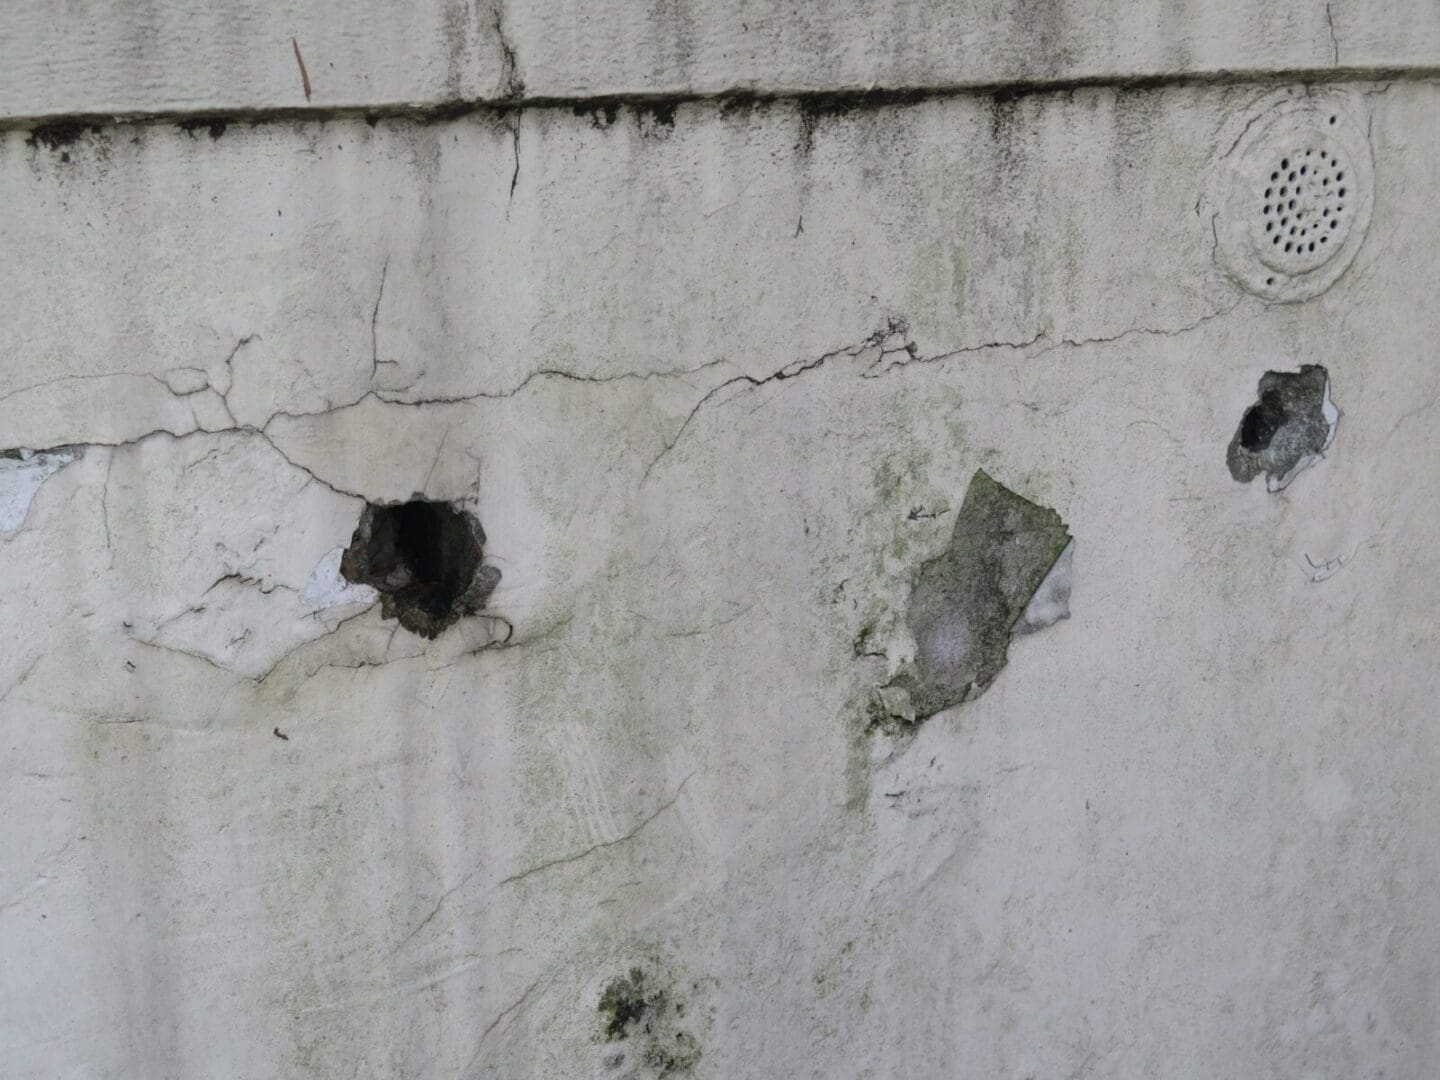 Holes, cracks, and stains on the wall